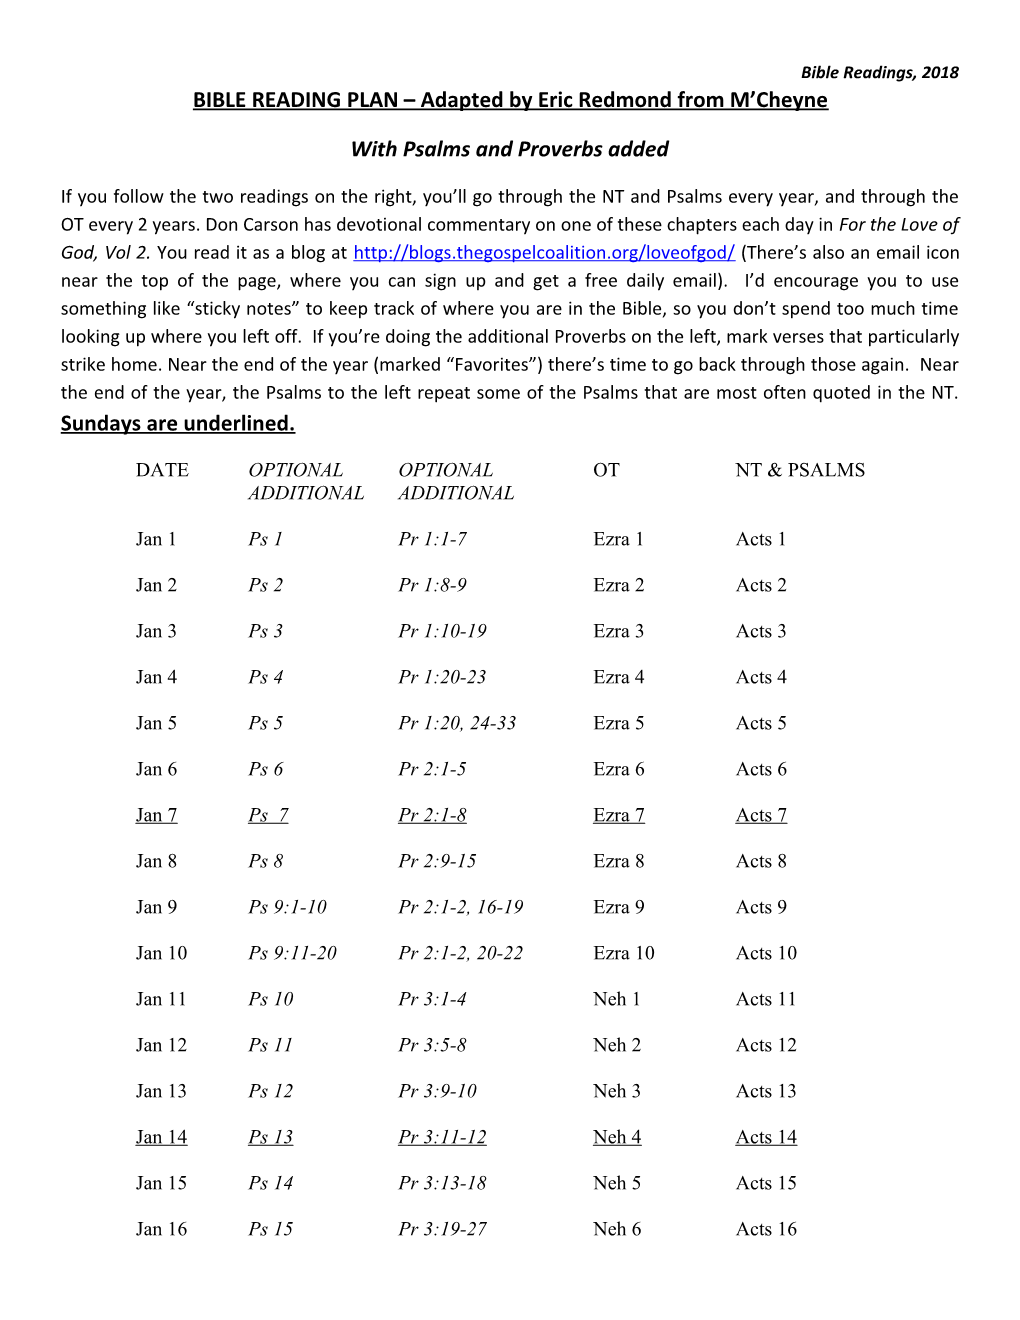 BIBLE READING PLAN Adapted by Eric Redmond from M Cheyne